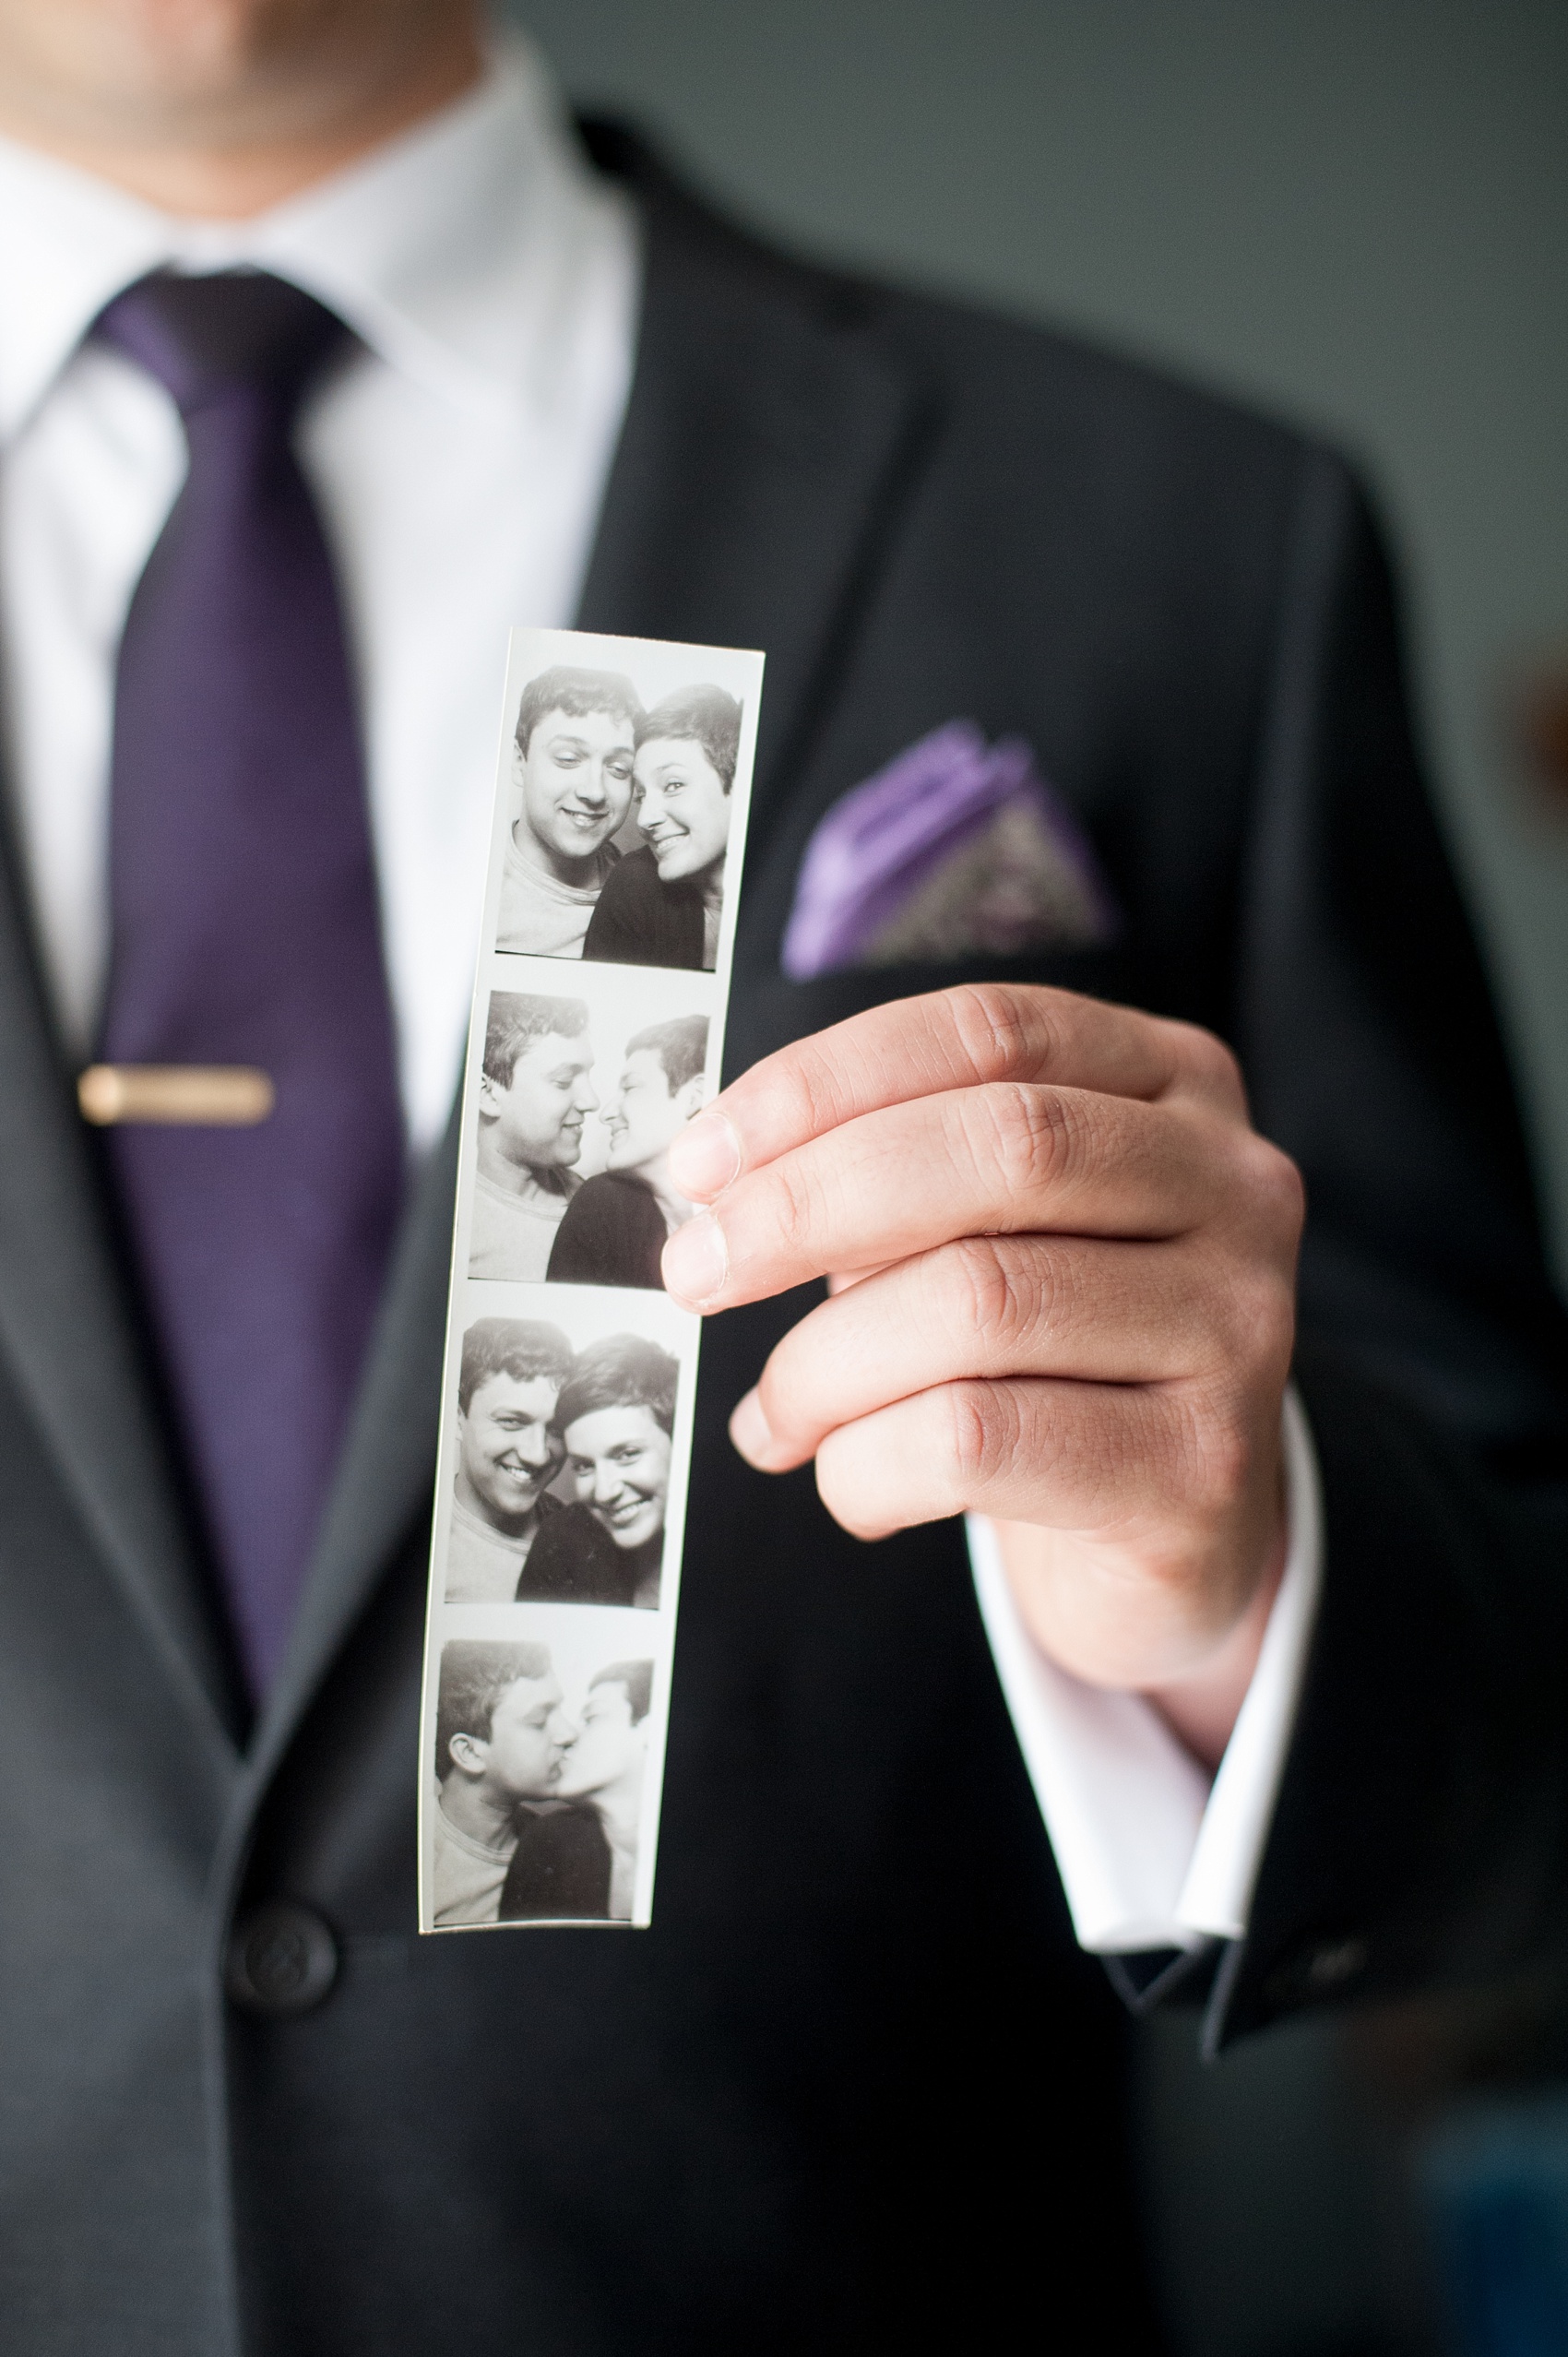 Mikkel Paige Photography Brooklyn Winery wedding photos. The groom holds a black and white photo strip of pictures with his bride against deep purple jewel tones.